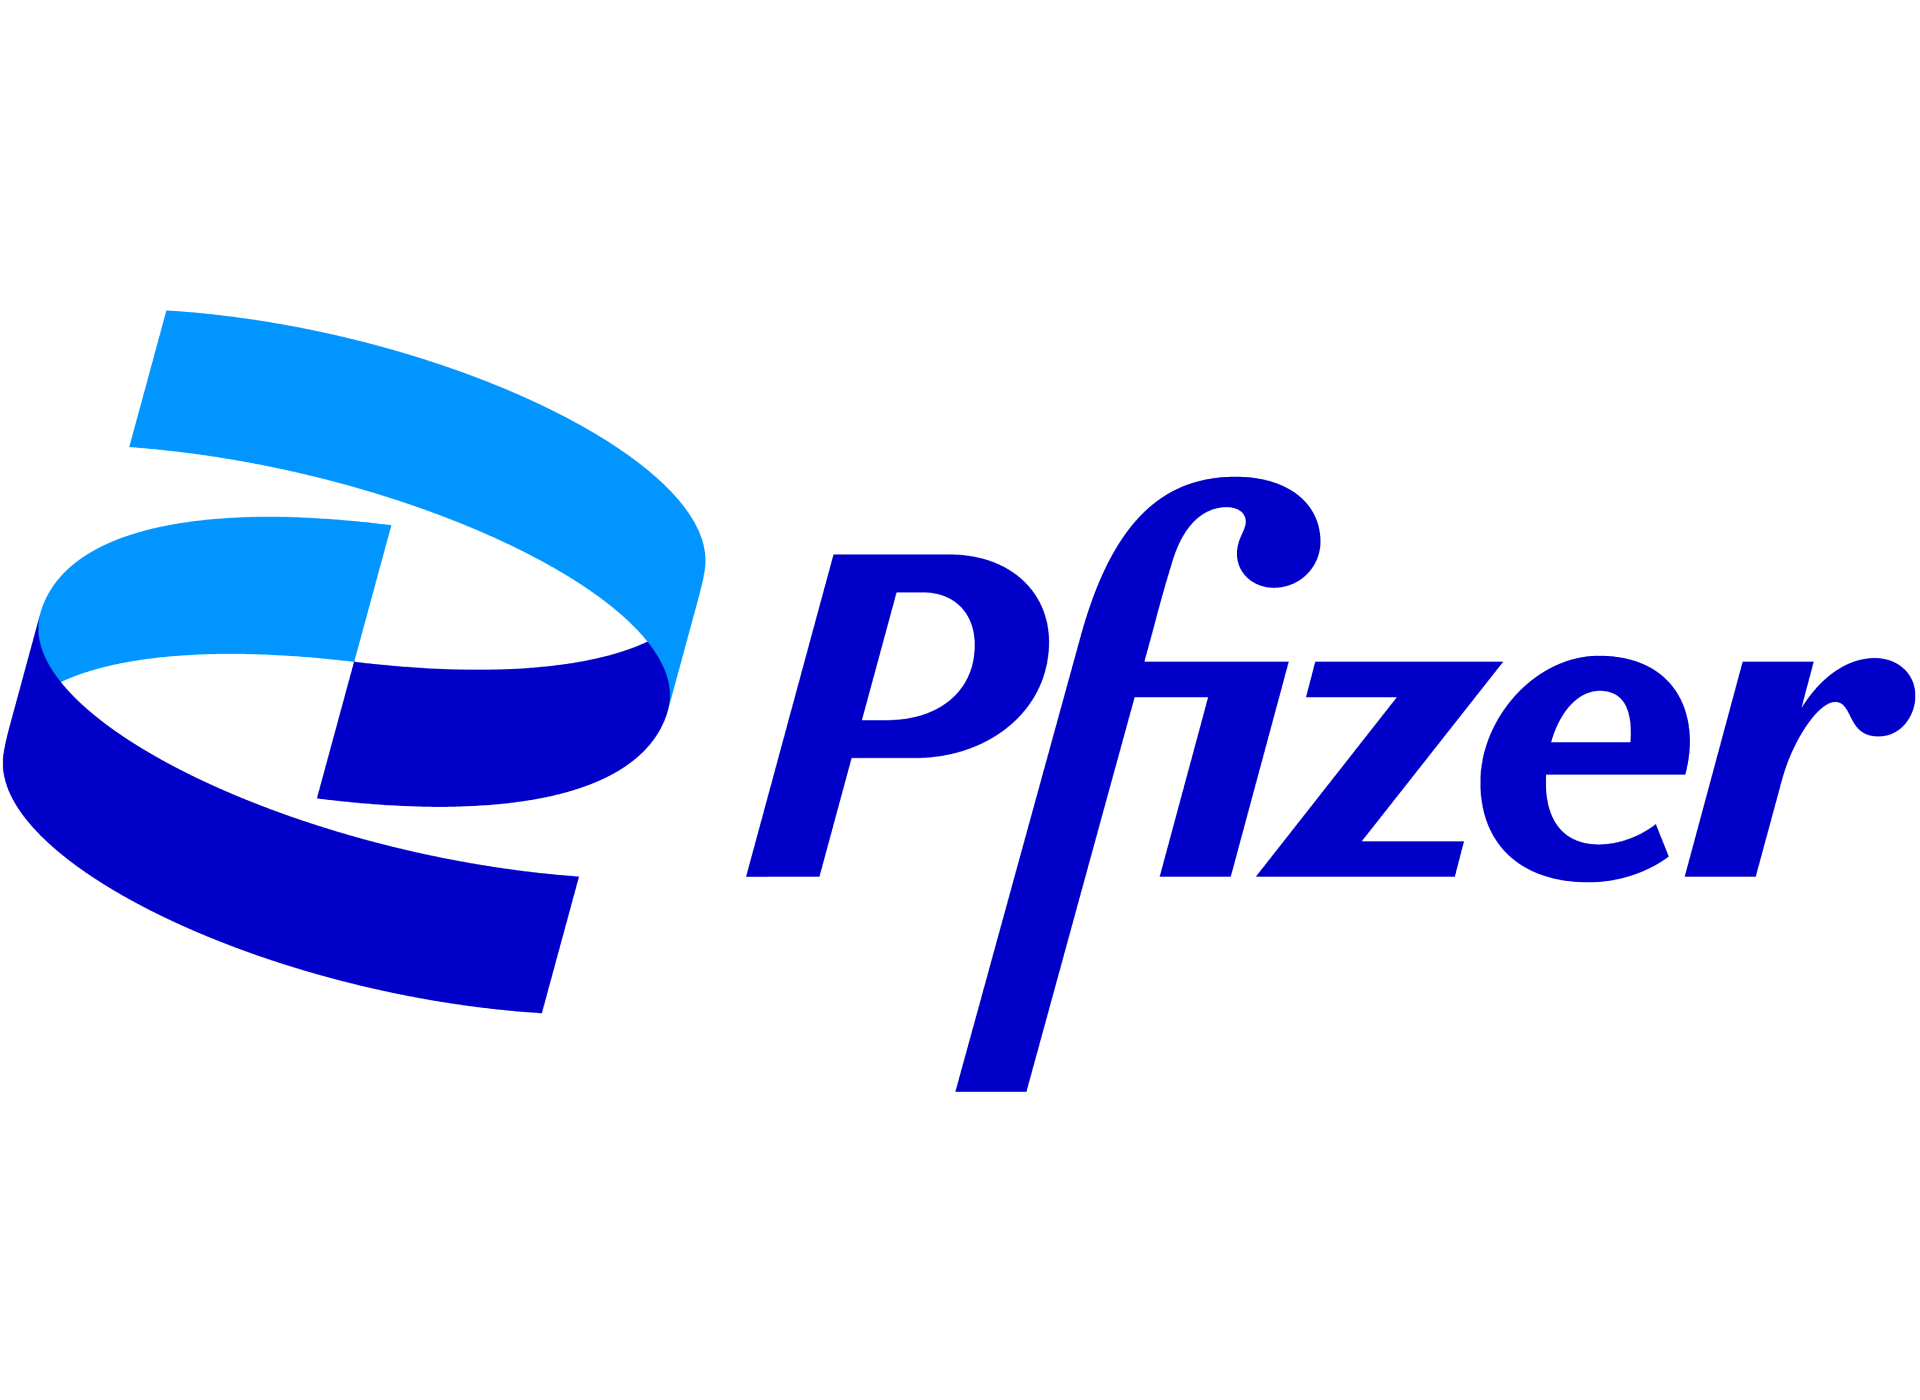 Pfizer may sell off consumer business - The Pharmaceutical Journal